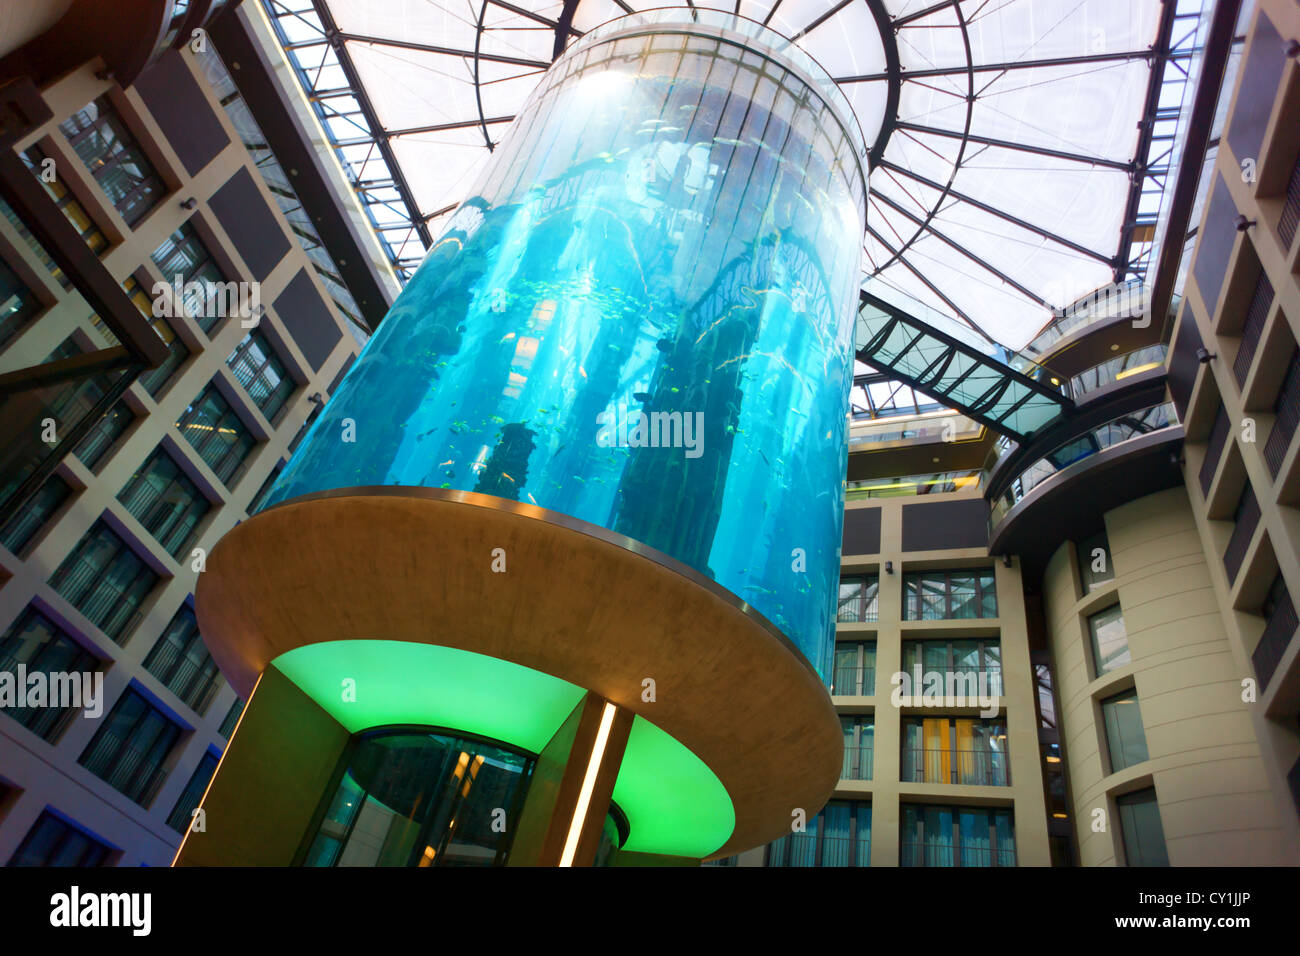 World’s Largest Cylindrical Aquarium, at the Radisson SAS hotel in Berlin Mitte, Germany. Stock Photo